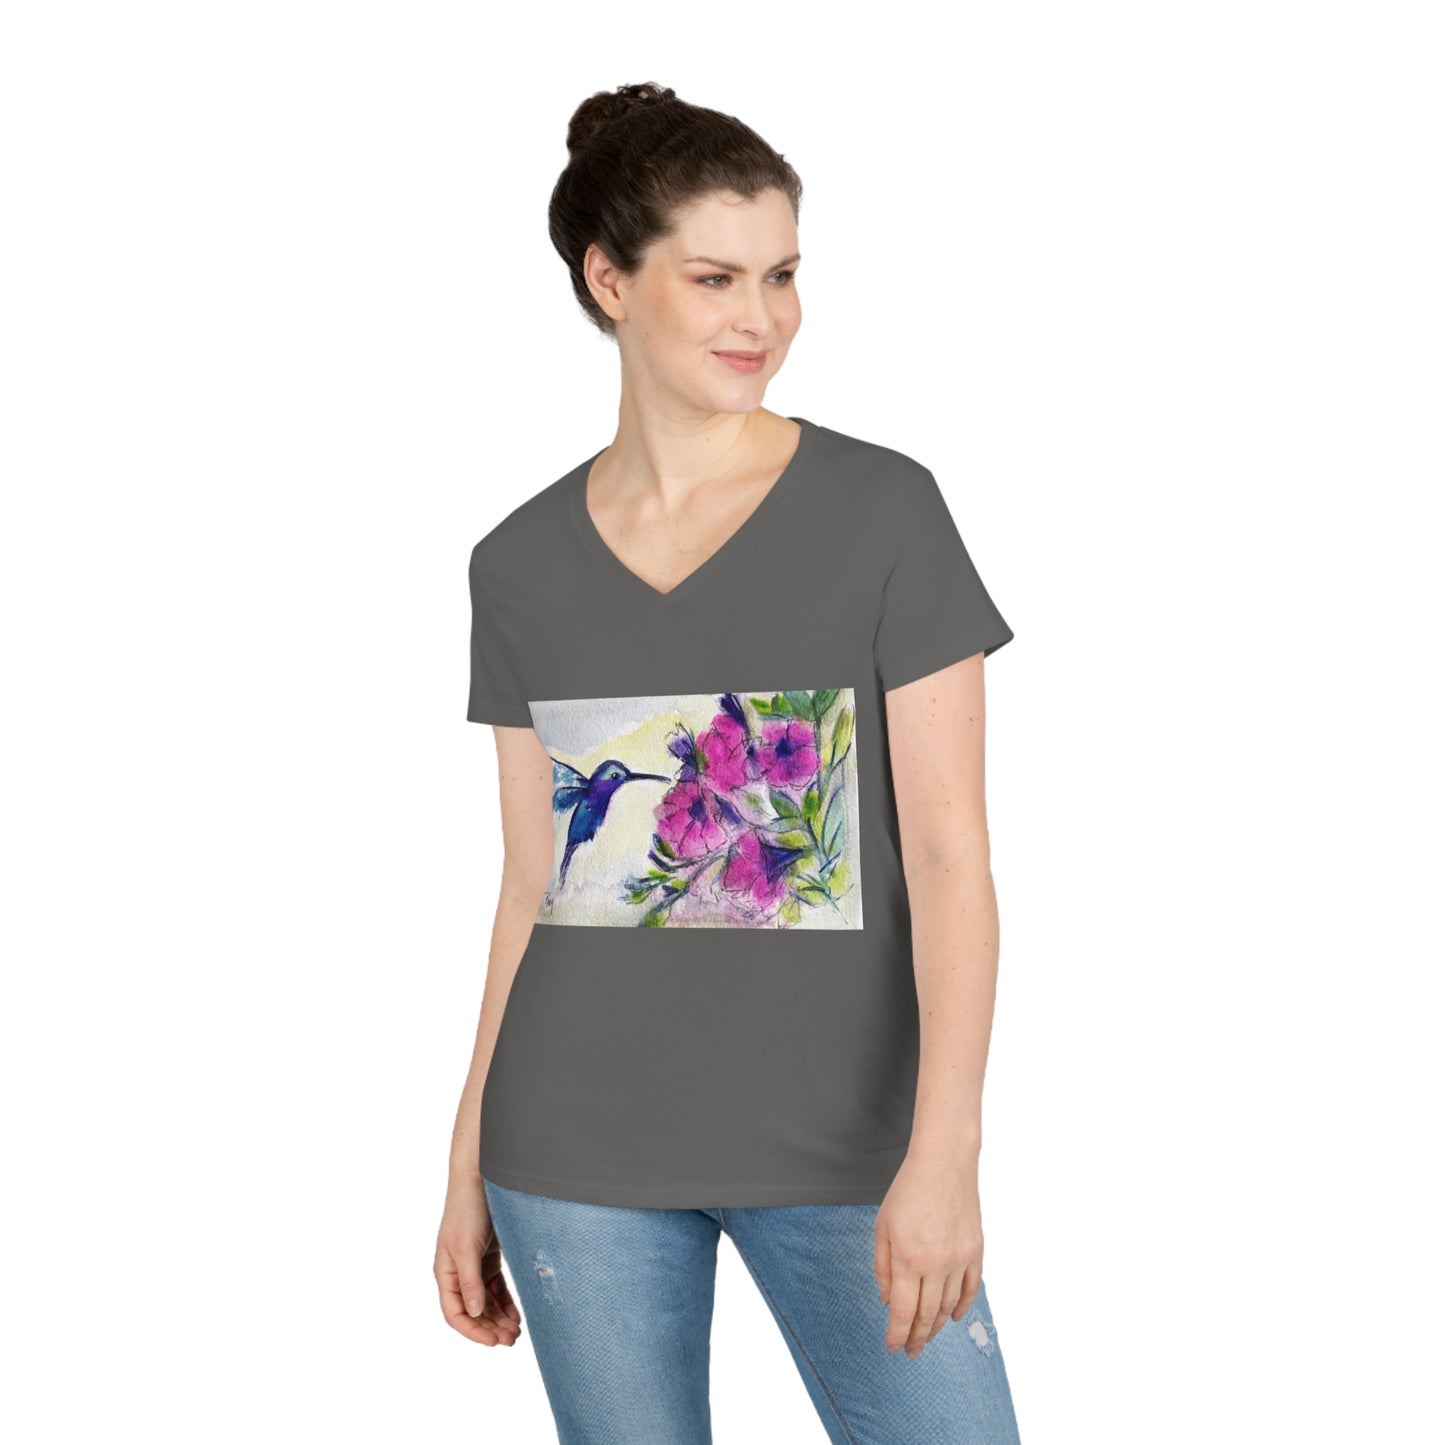 Hummingbird with Pink Tube Flowers Ladies' V-Neck T-Shirt